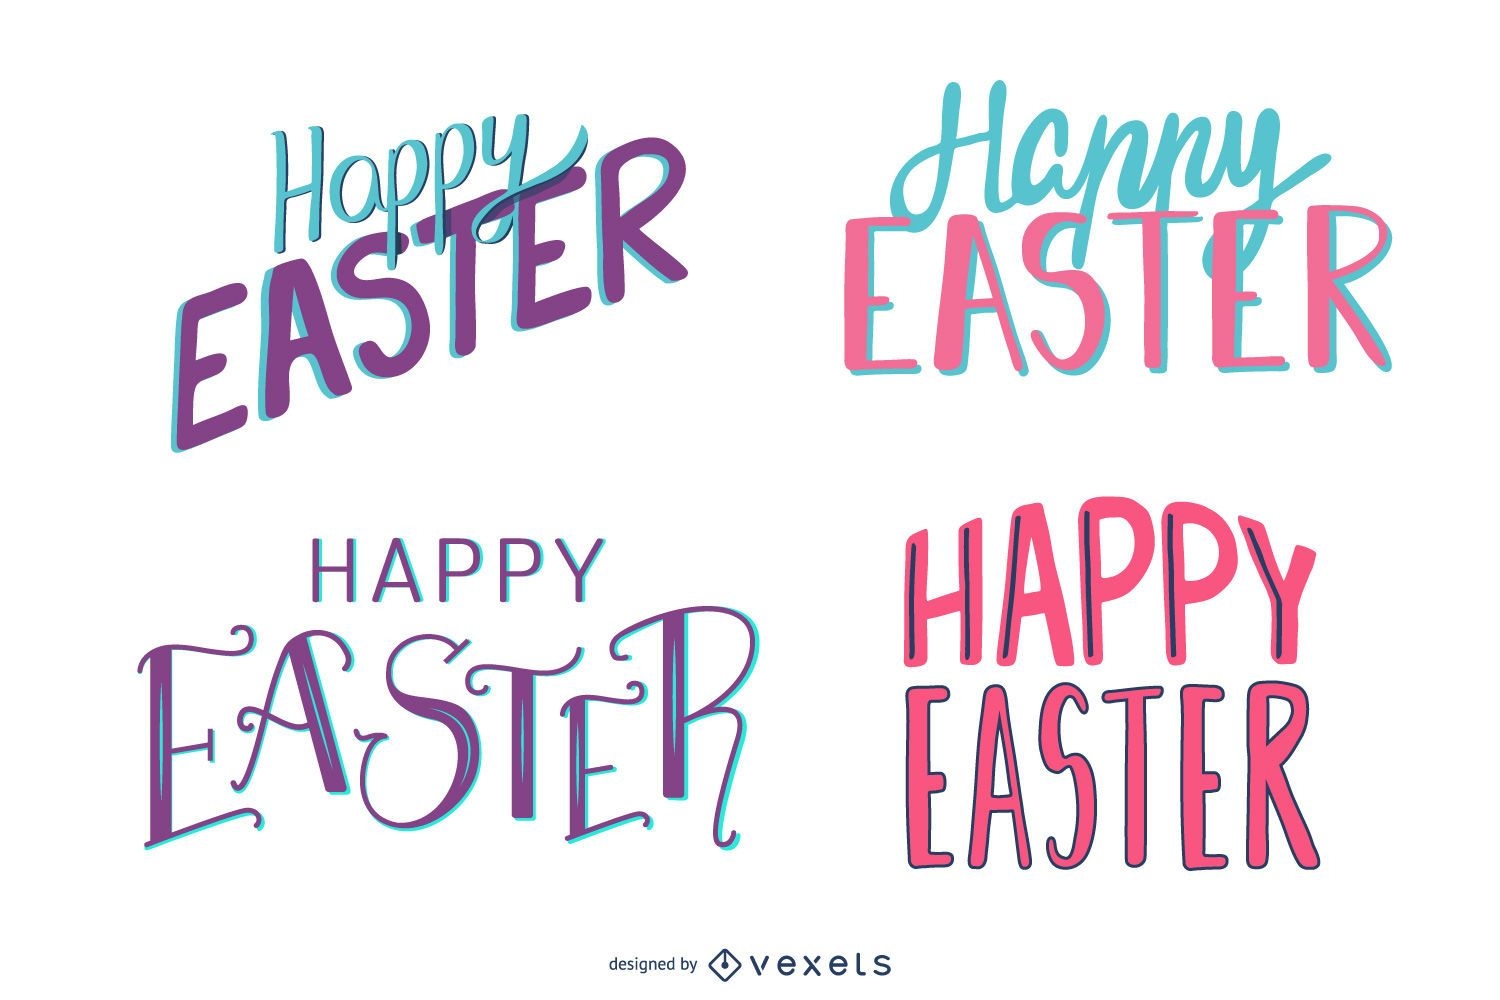 Happy easter colorful lettering set